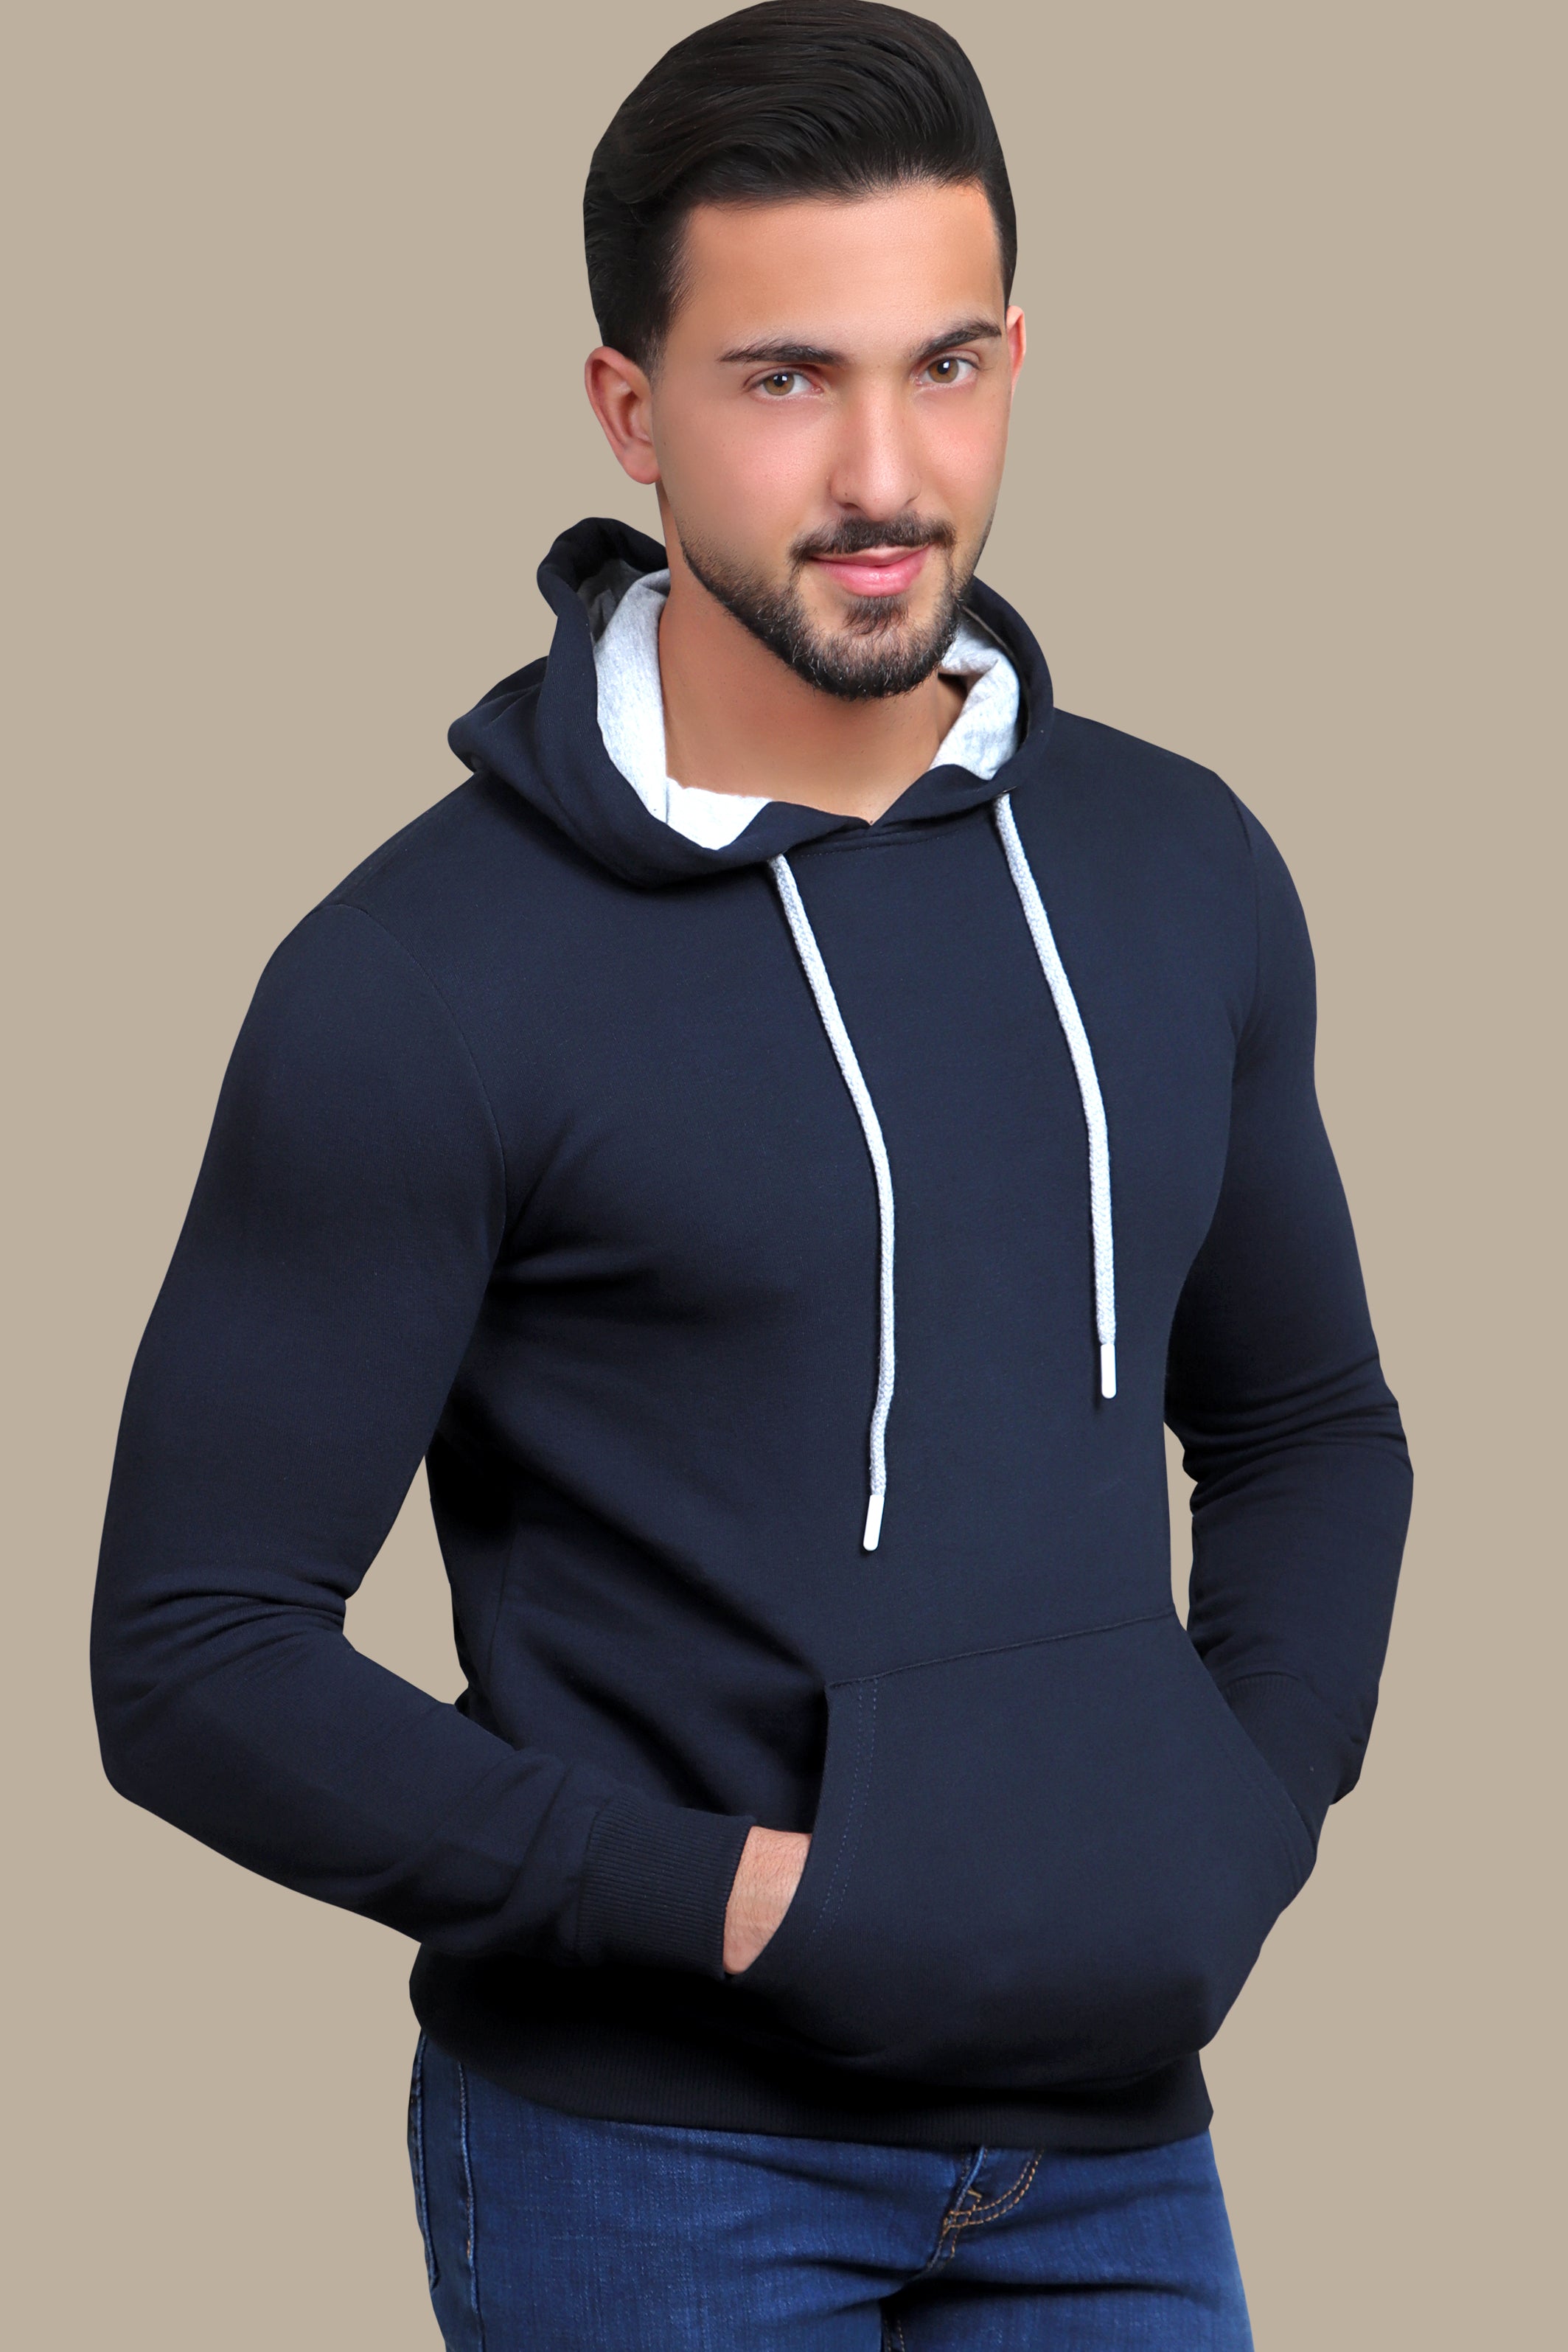 Nautical Ease: Navy Basic Hoodie for Casual Comfort